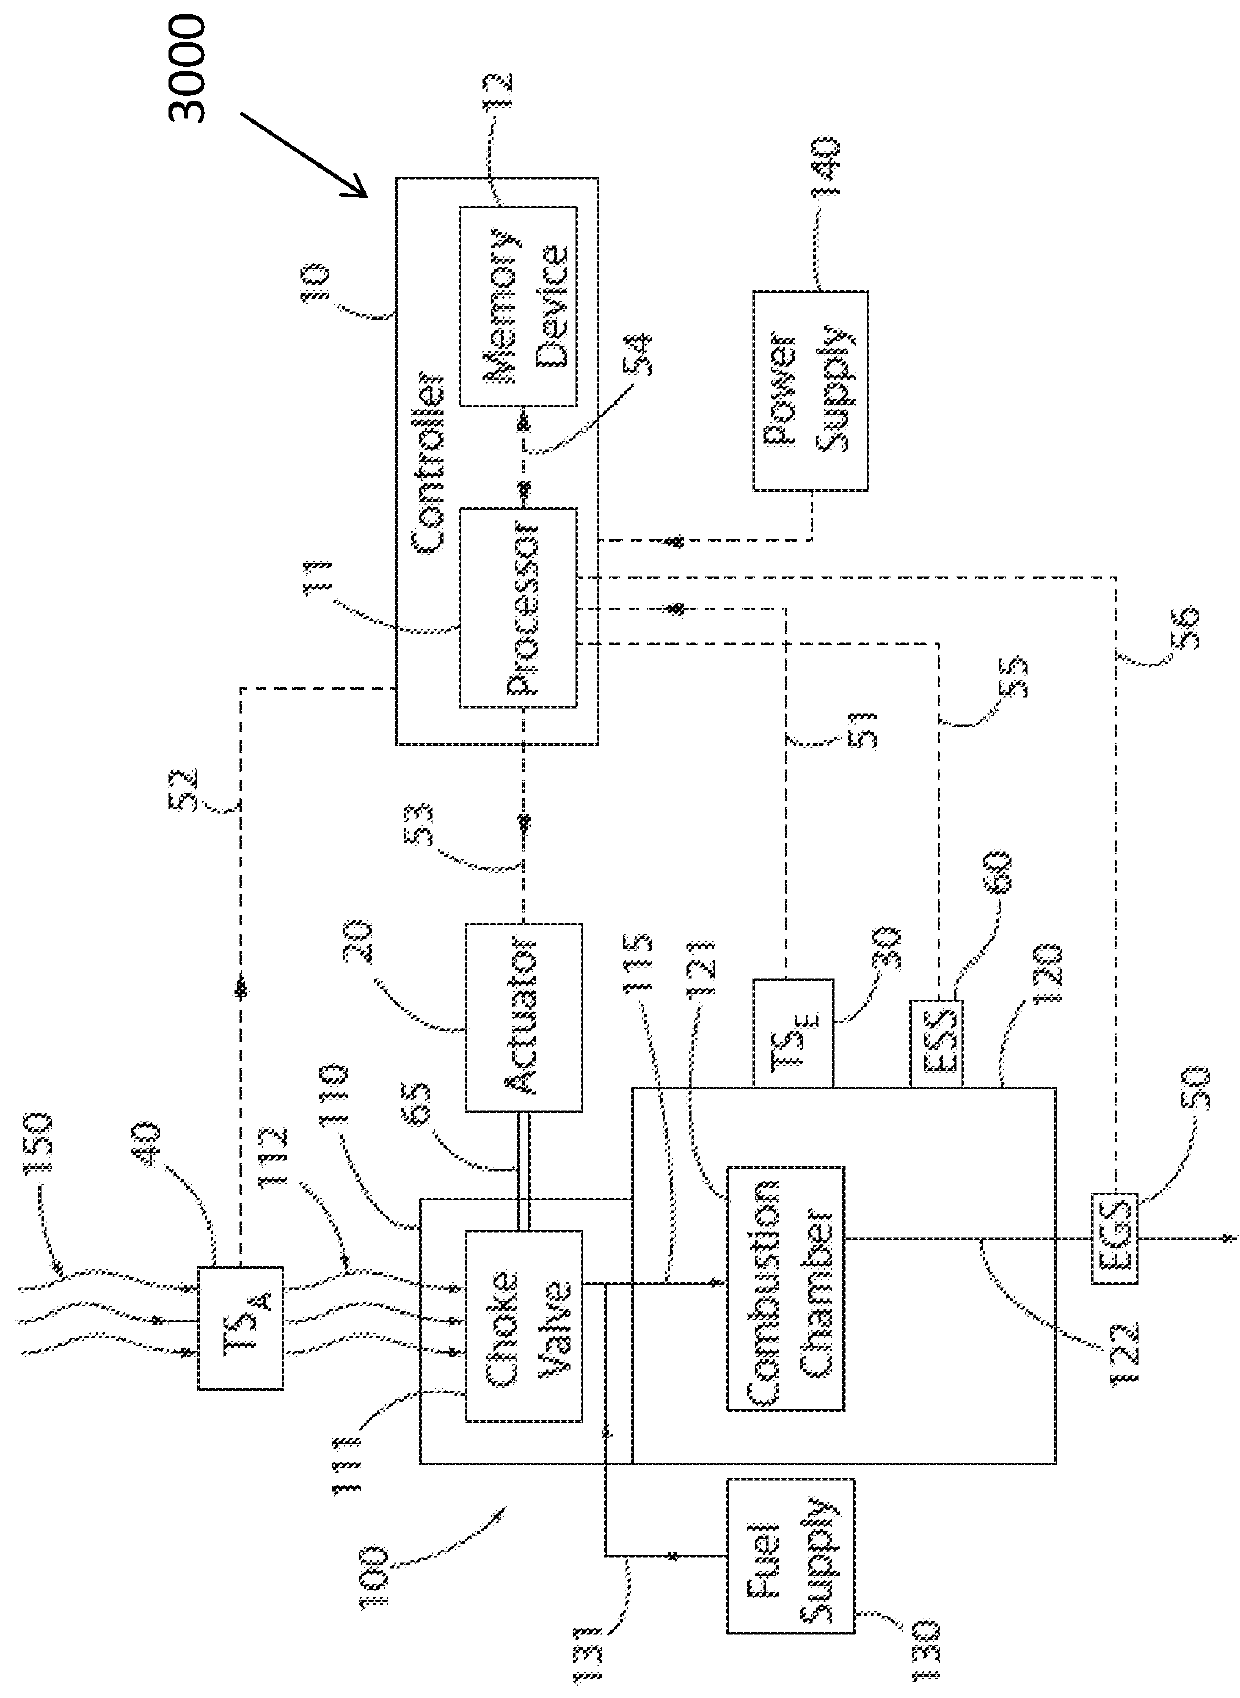 Ignition module for internal combustion engine with integrated communication device